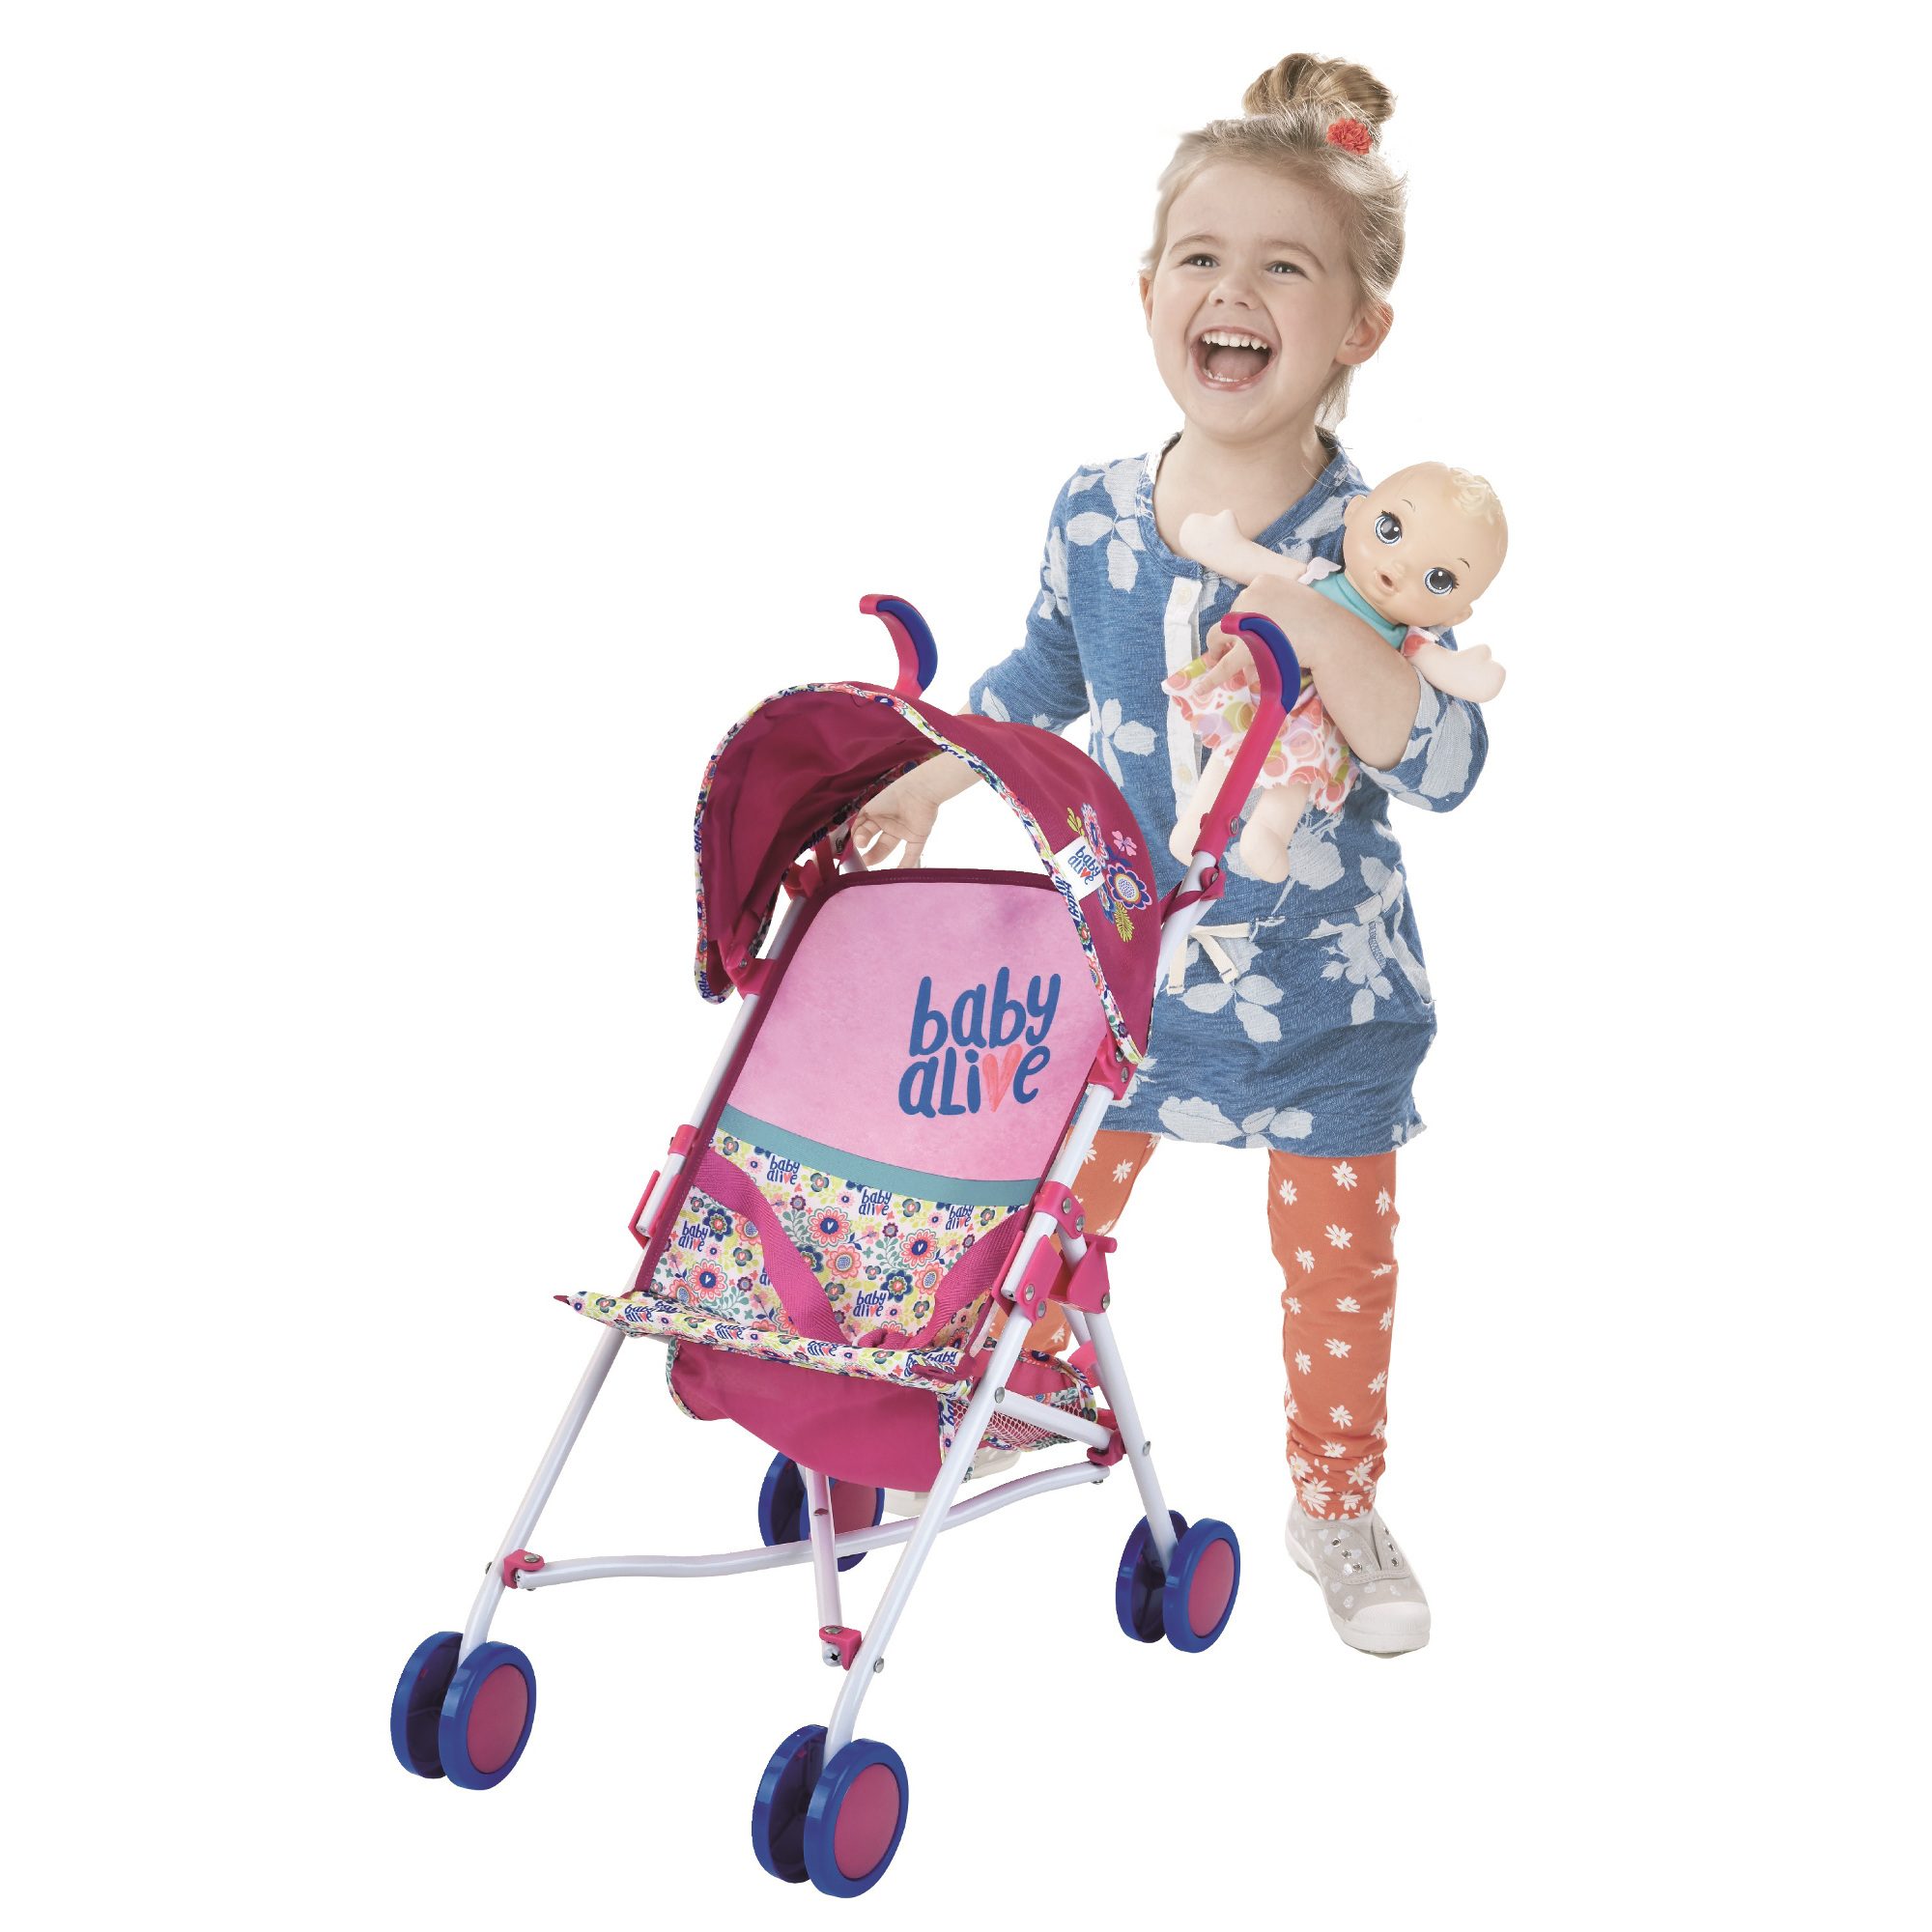 baby dolls and strollers